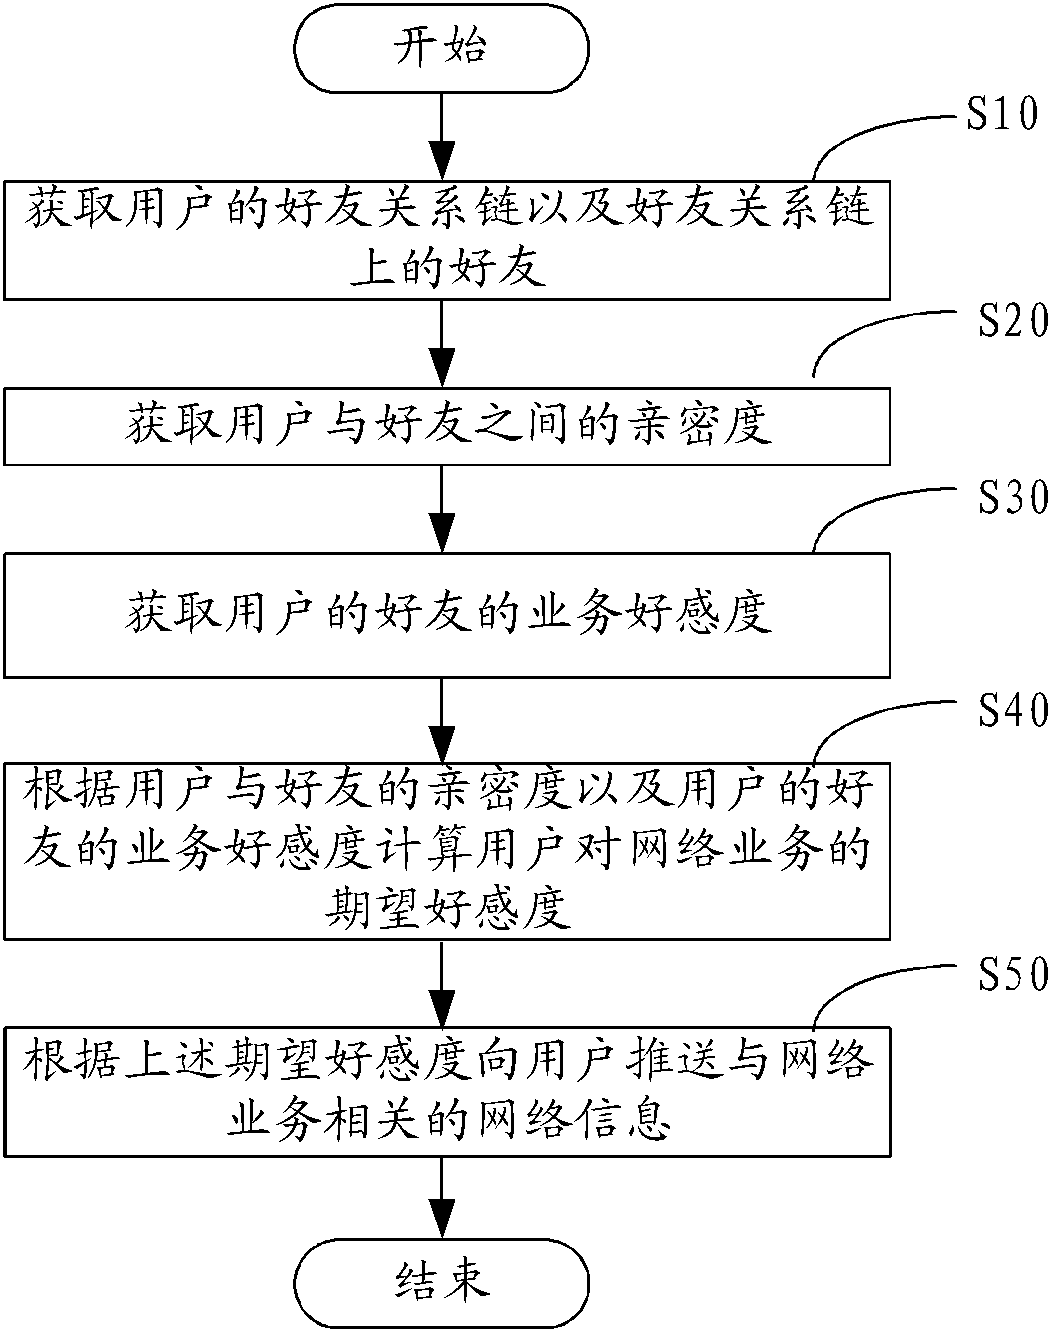 Method and system for pushing network information